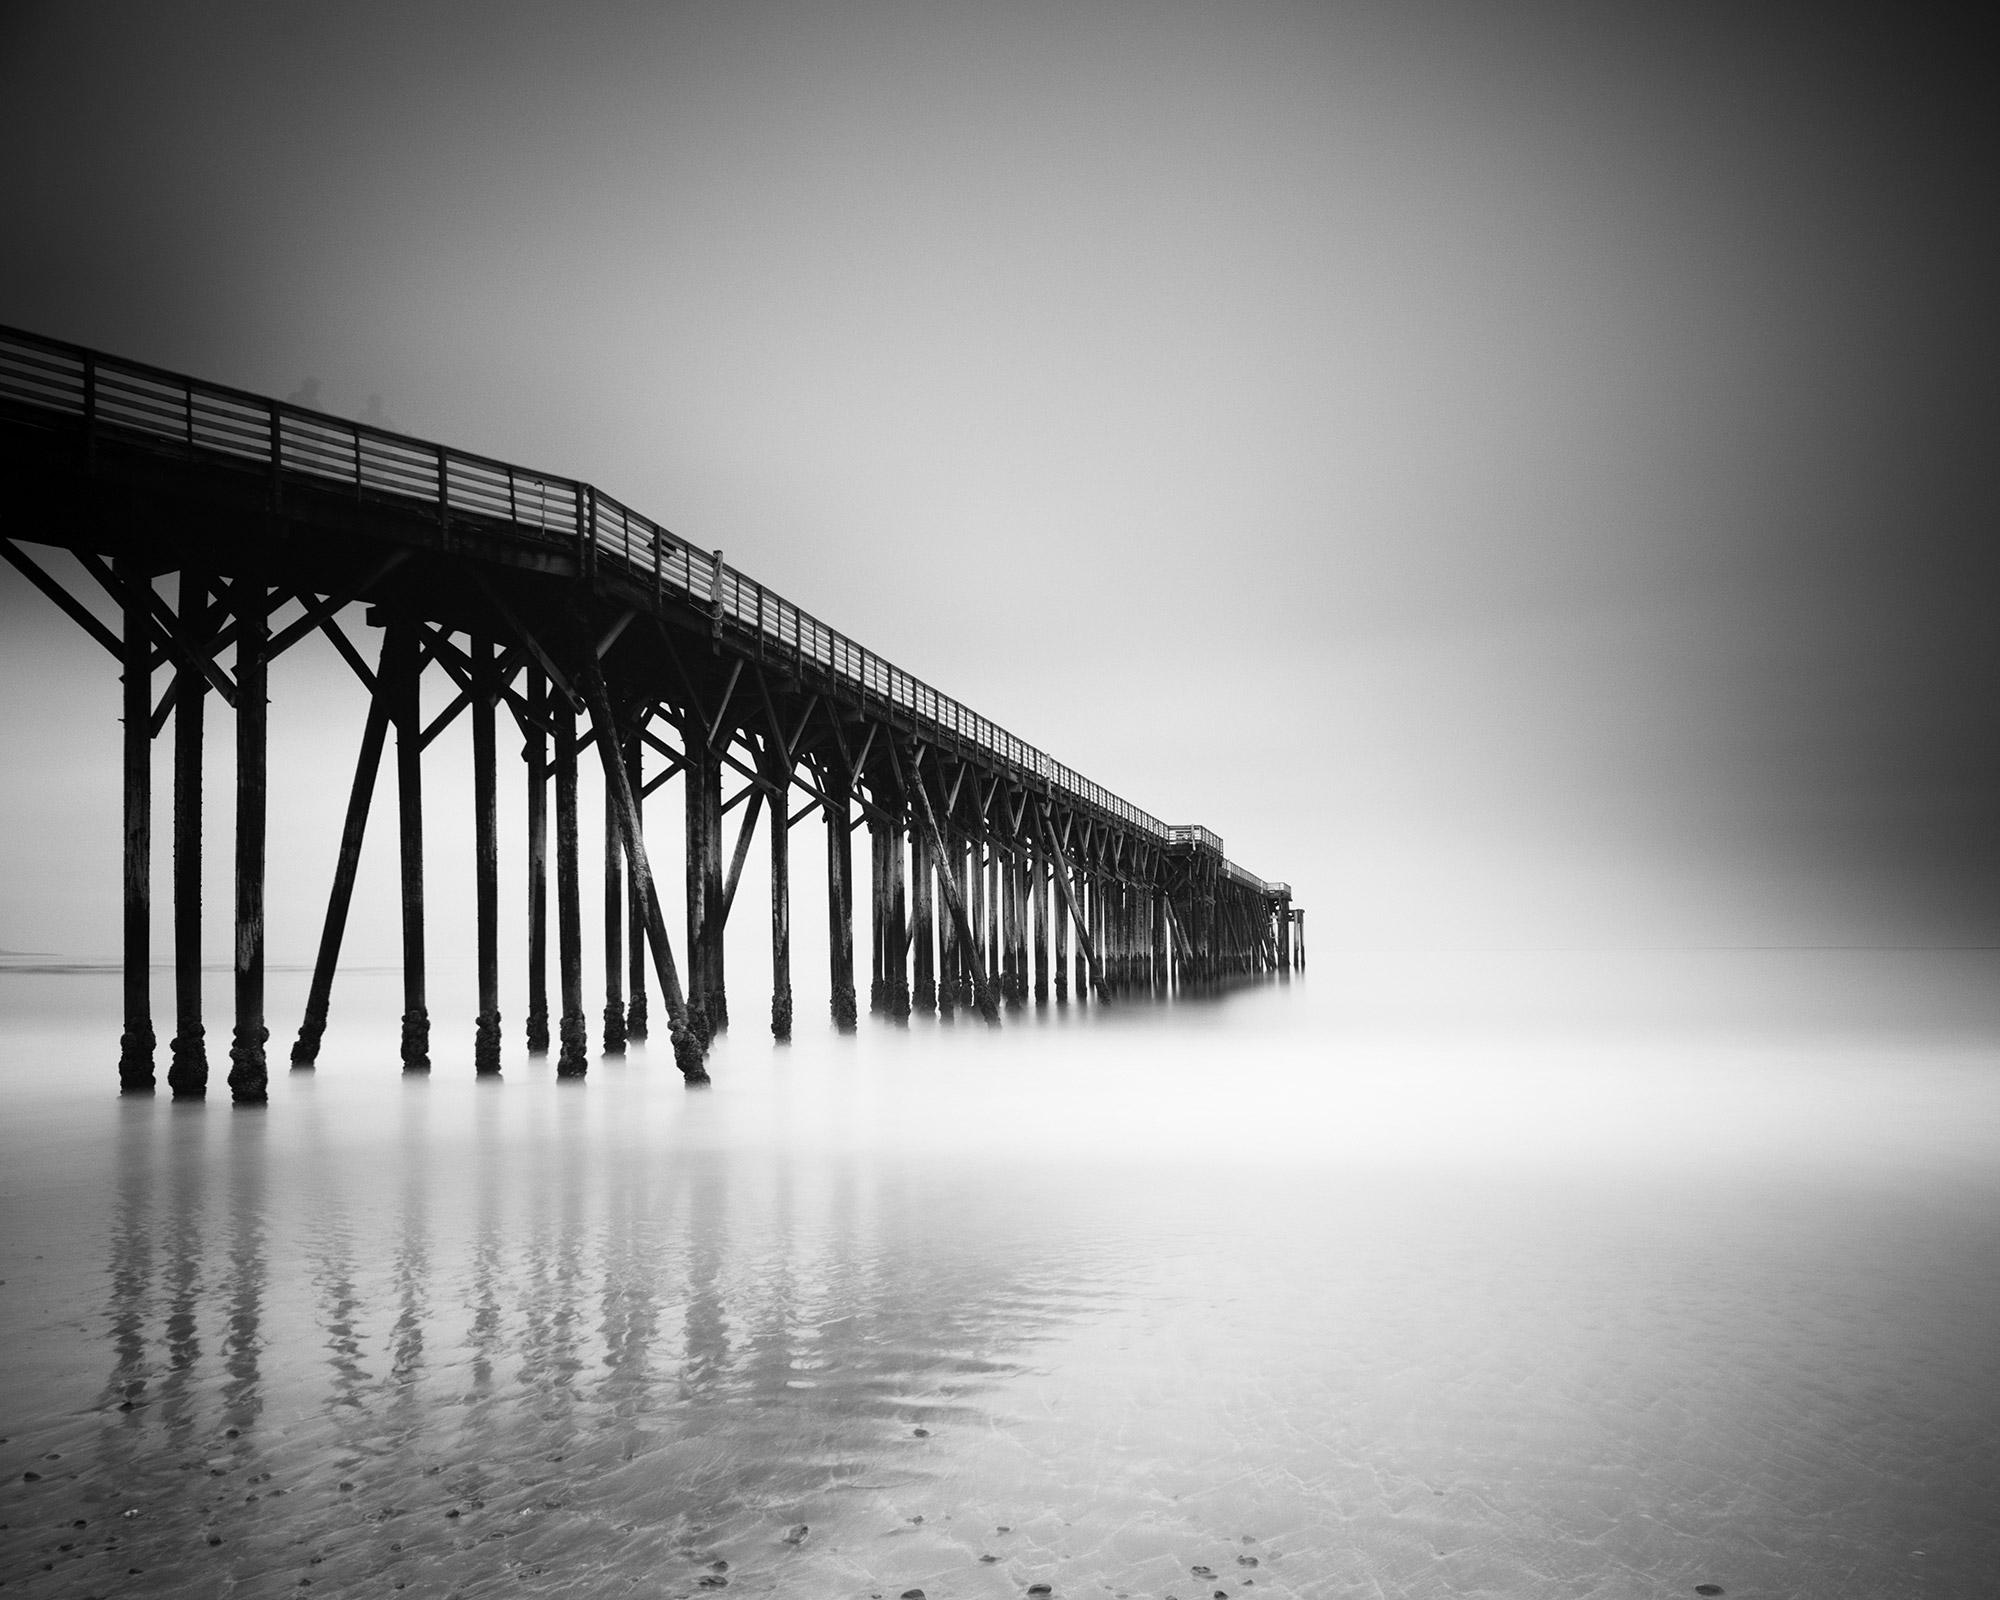 Gerald Berghammer Black and White Photograph - Black Pier, Beach, California, USA, black and white long exposure photography